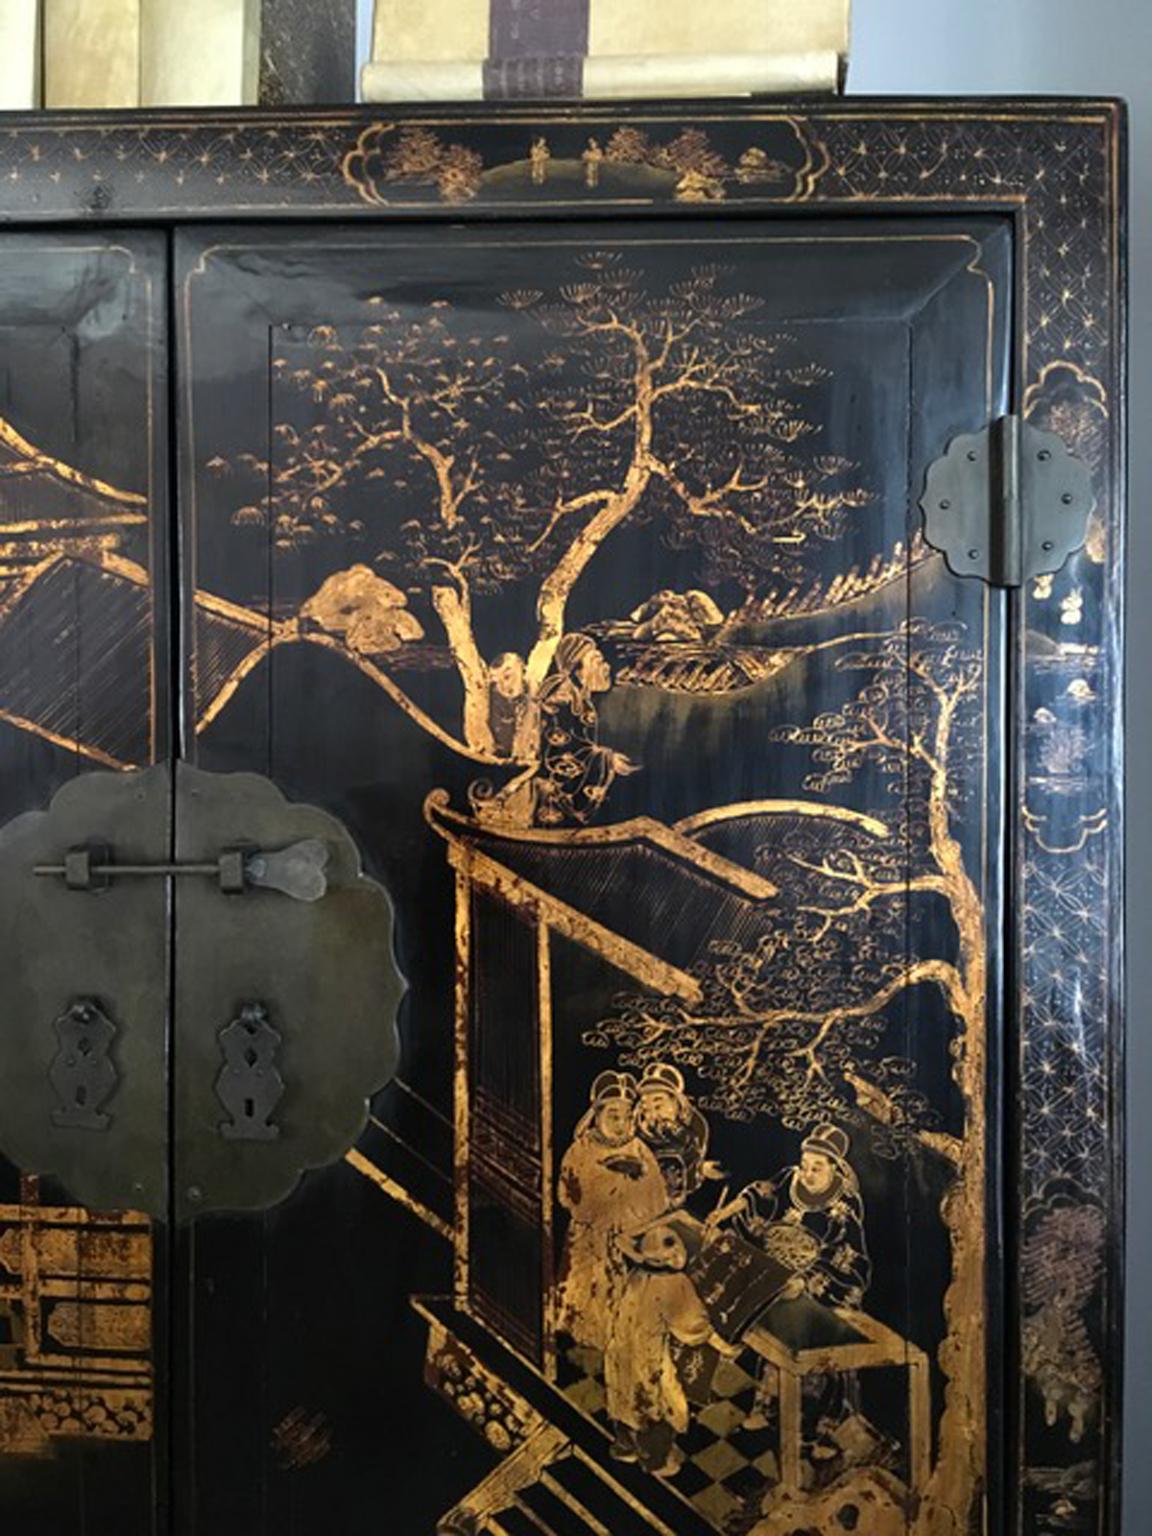 Chinese Export China 1930 Black Lacquered Elmwood Cabinet  with Gold Paintings